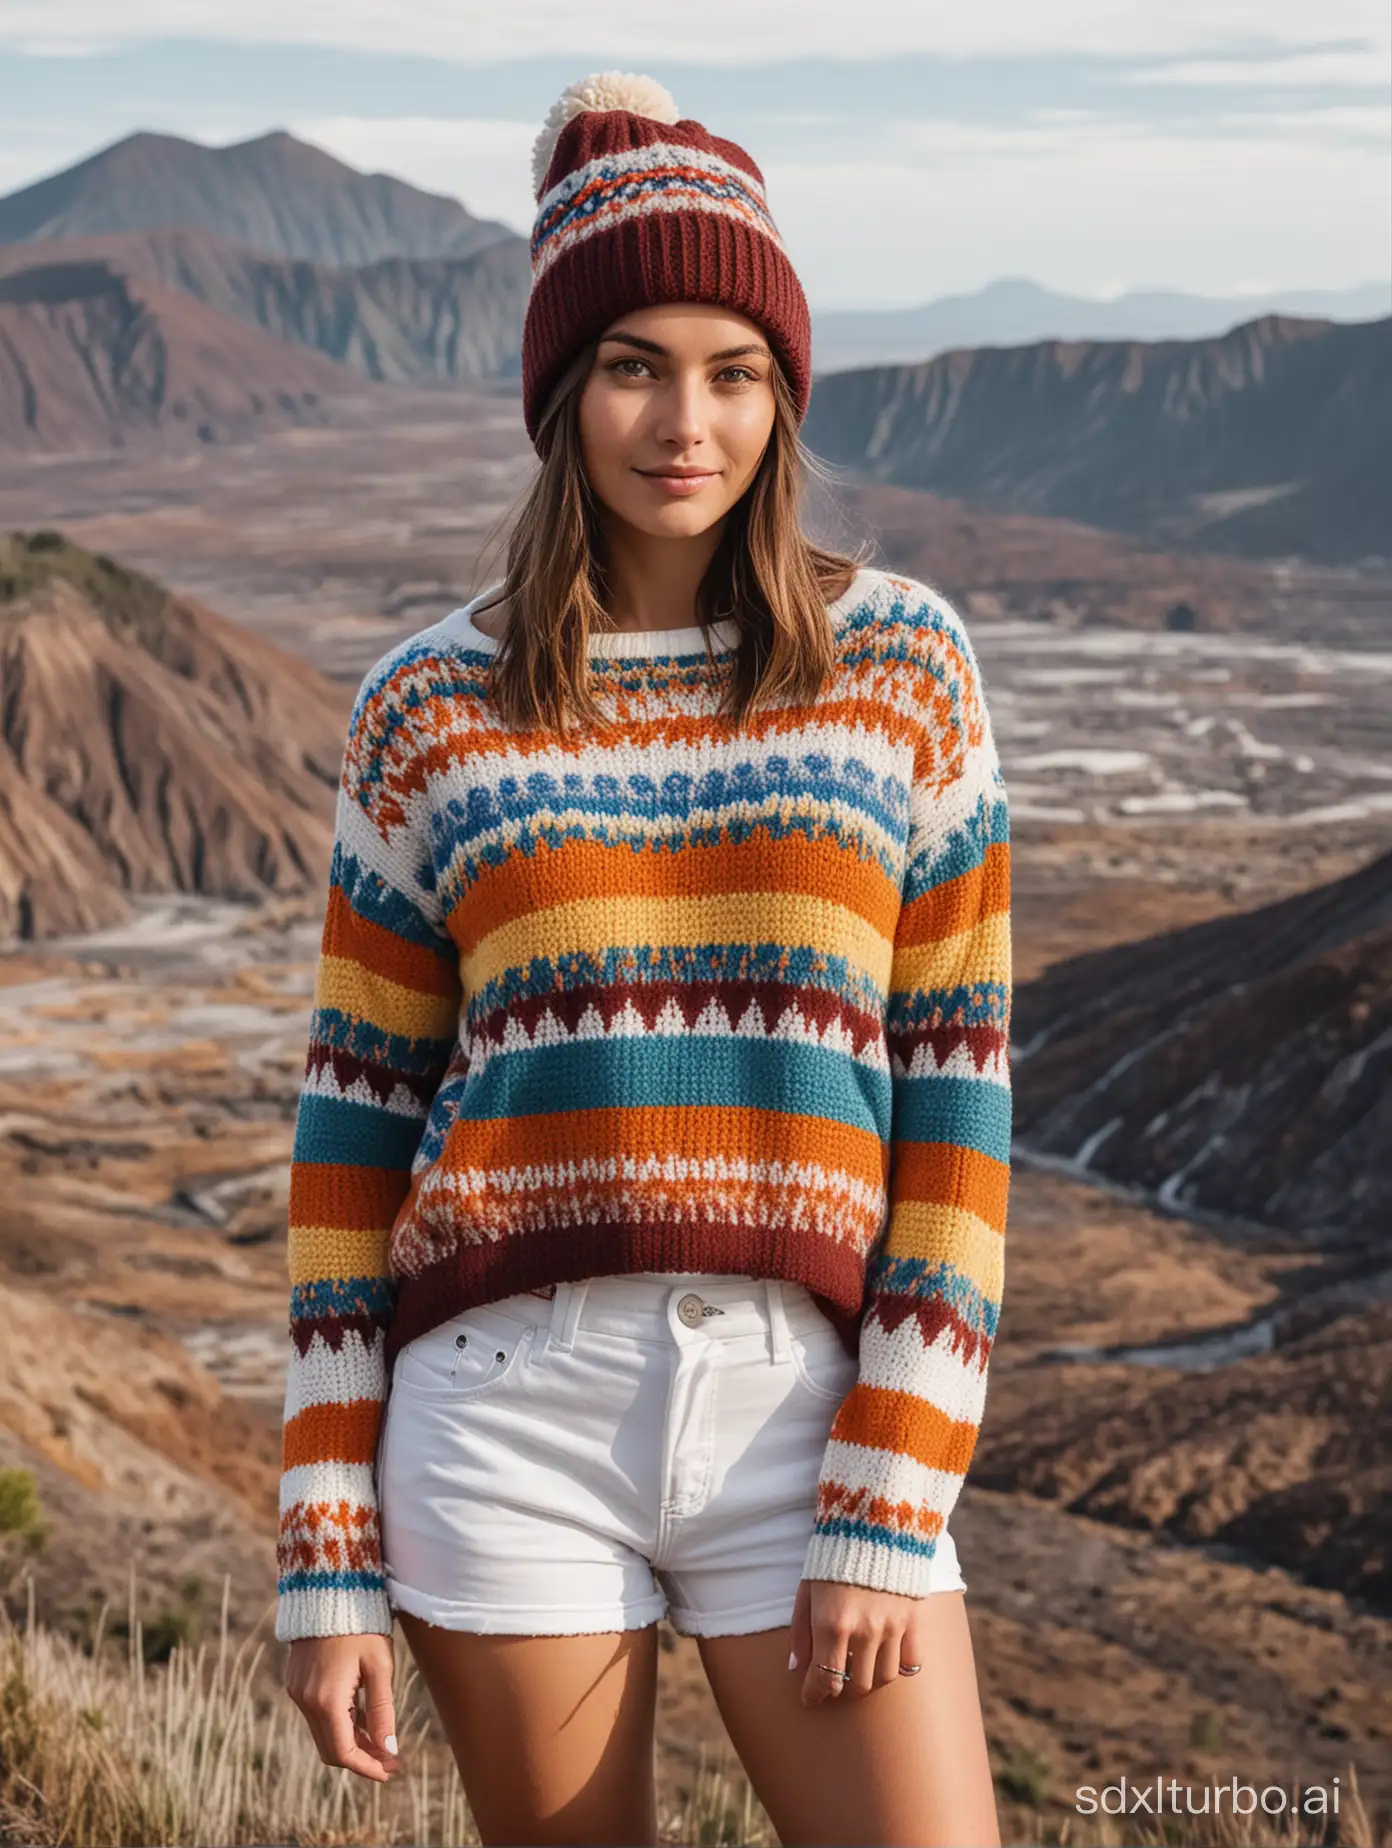 Colorful-Sweater-Woman-Overlooking-Mount-Bromo